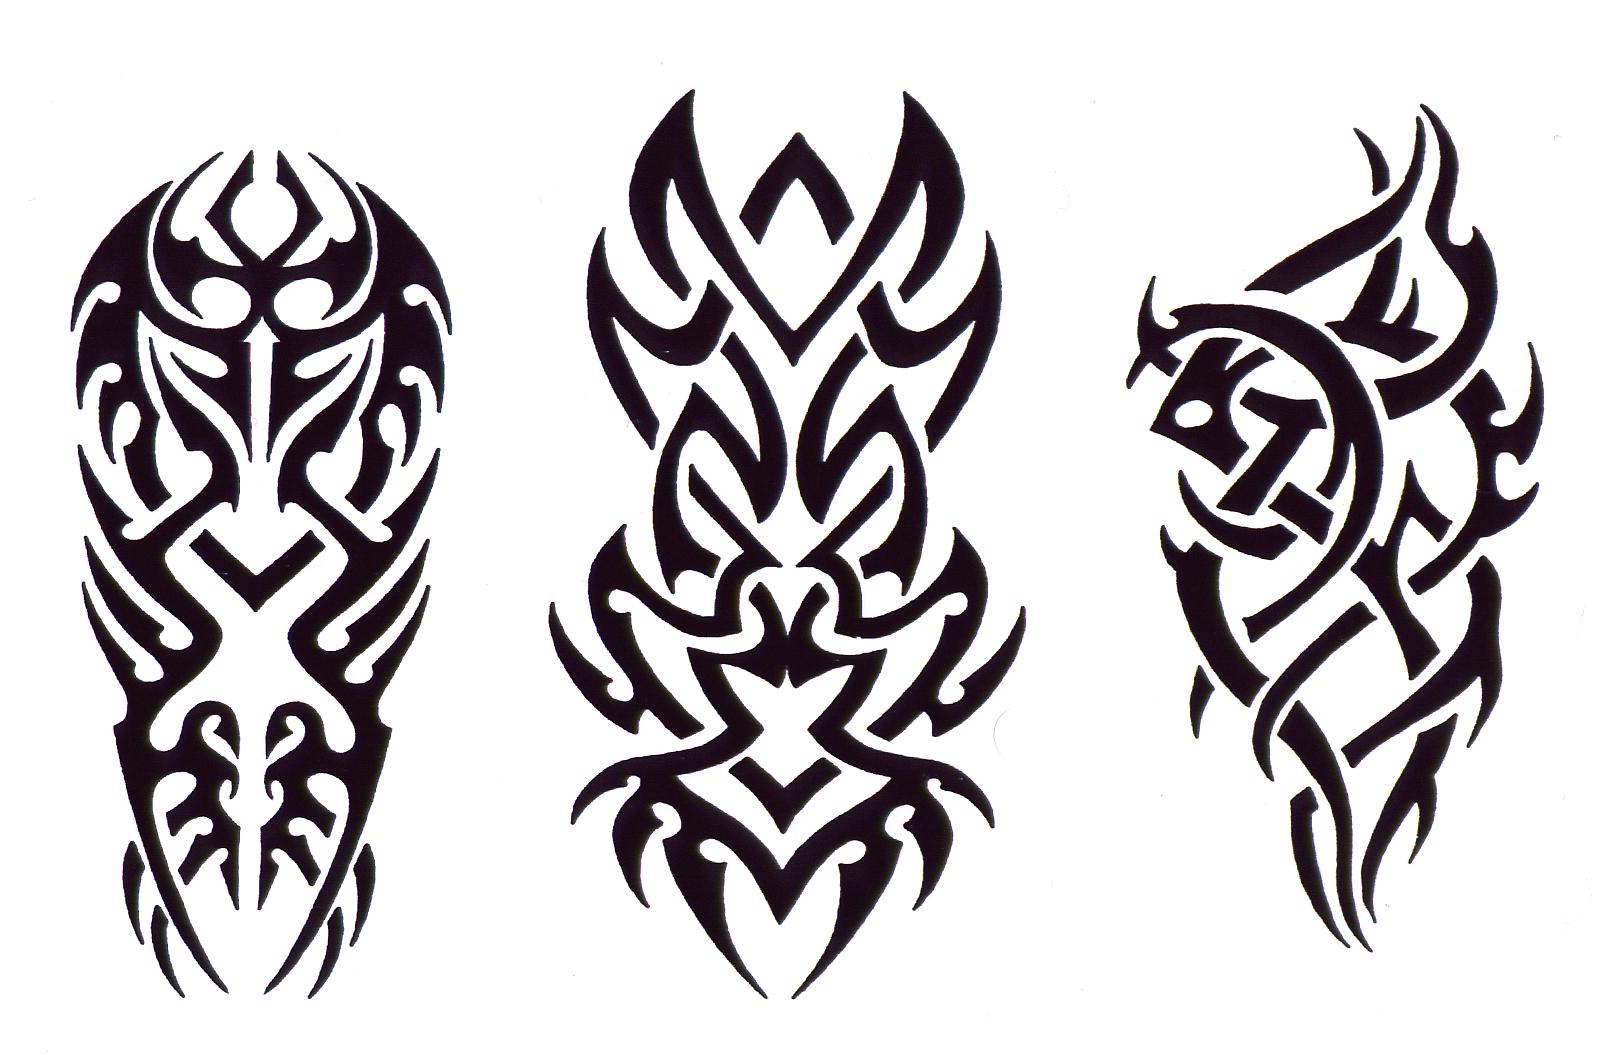 Tribal tattoo of dragon stock vector. Illustration of background - 4478148